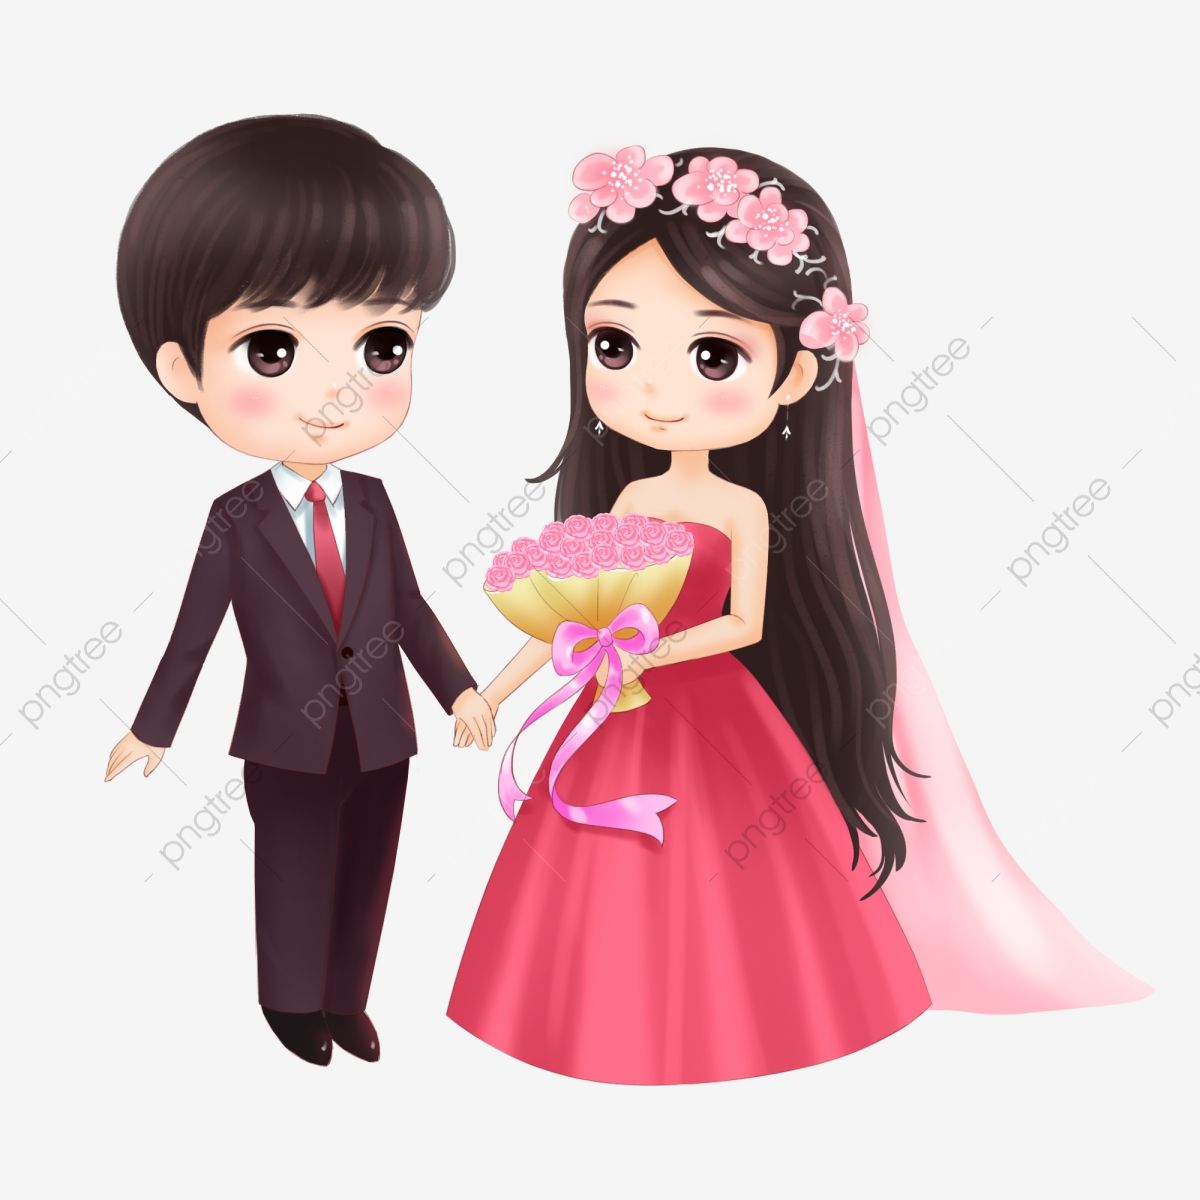 Valentines Day Couple Cartoon Wedding Comics Couple Comics, Wedding Comics, Wedding Cartoon, Png Free Buckle Png Transparent Clipart Image And Psd File For Free Download